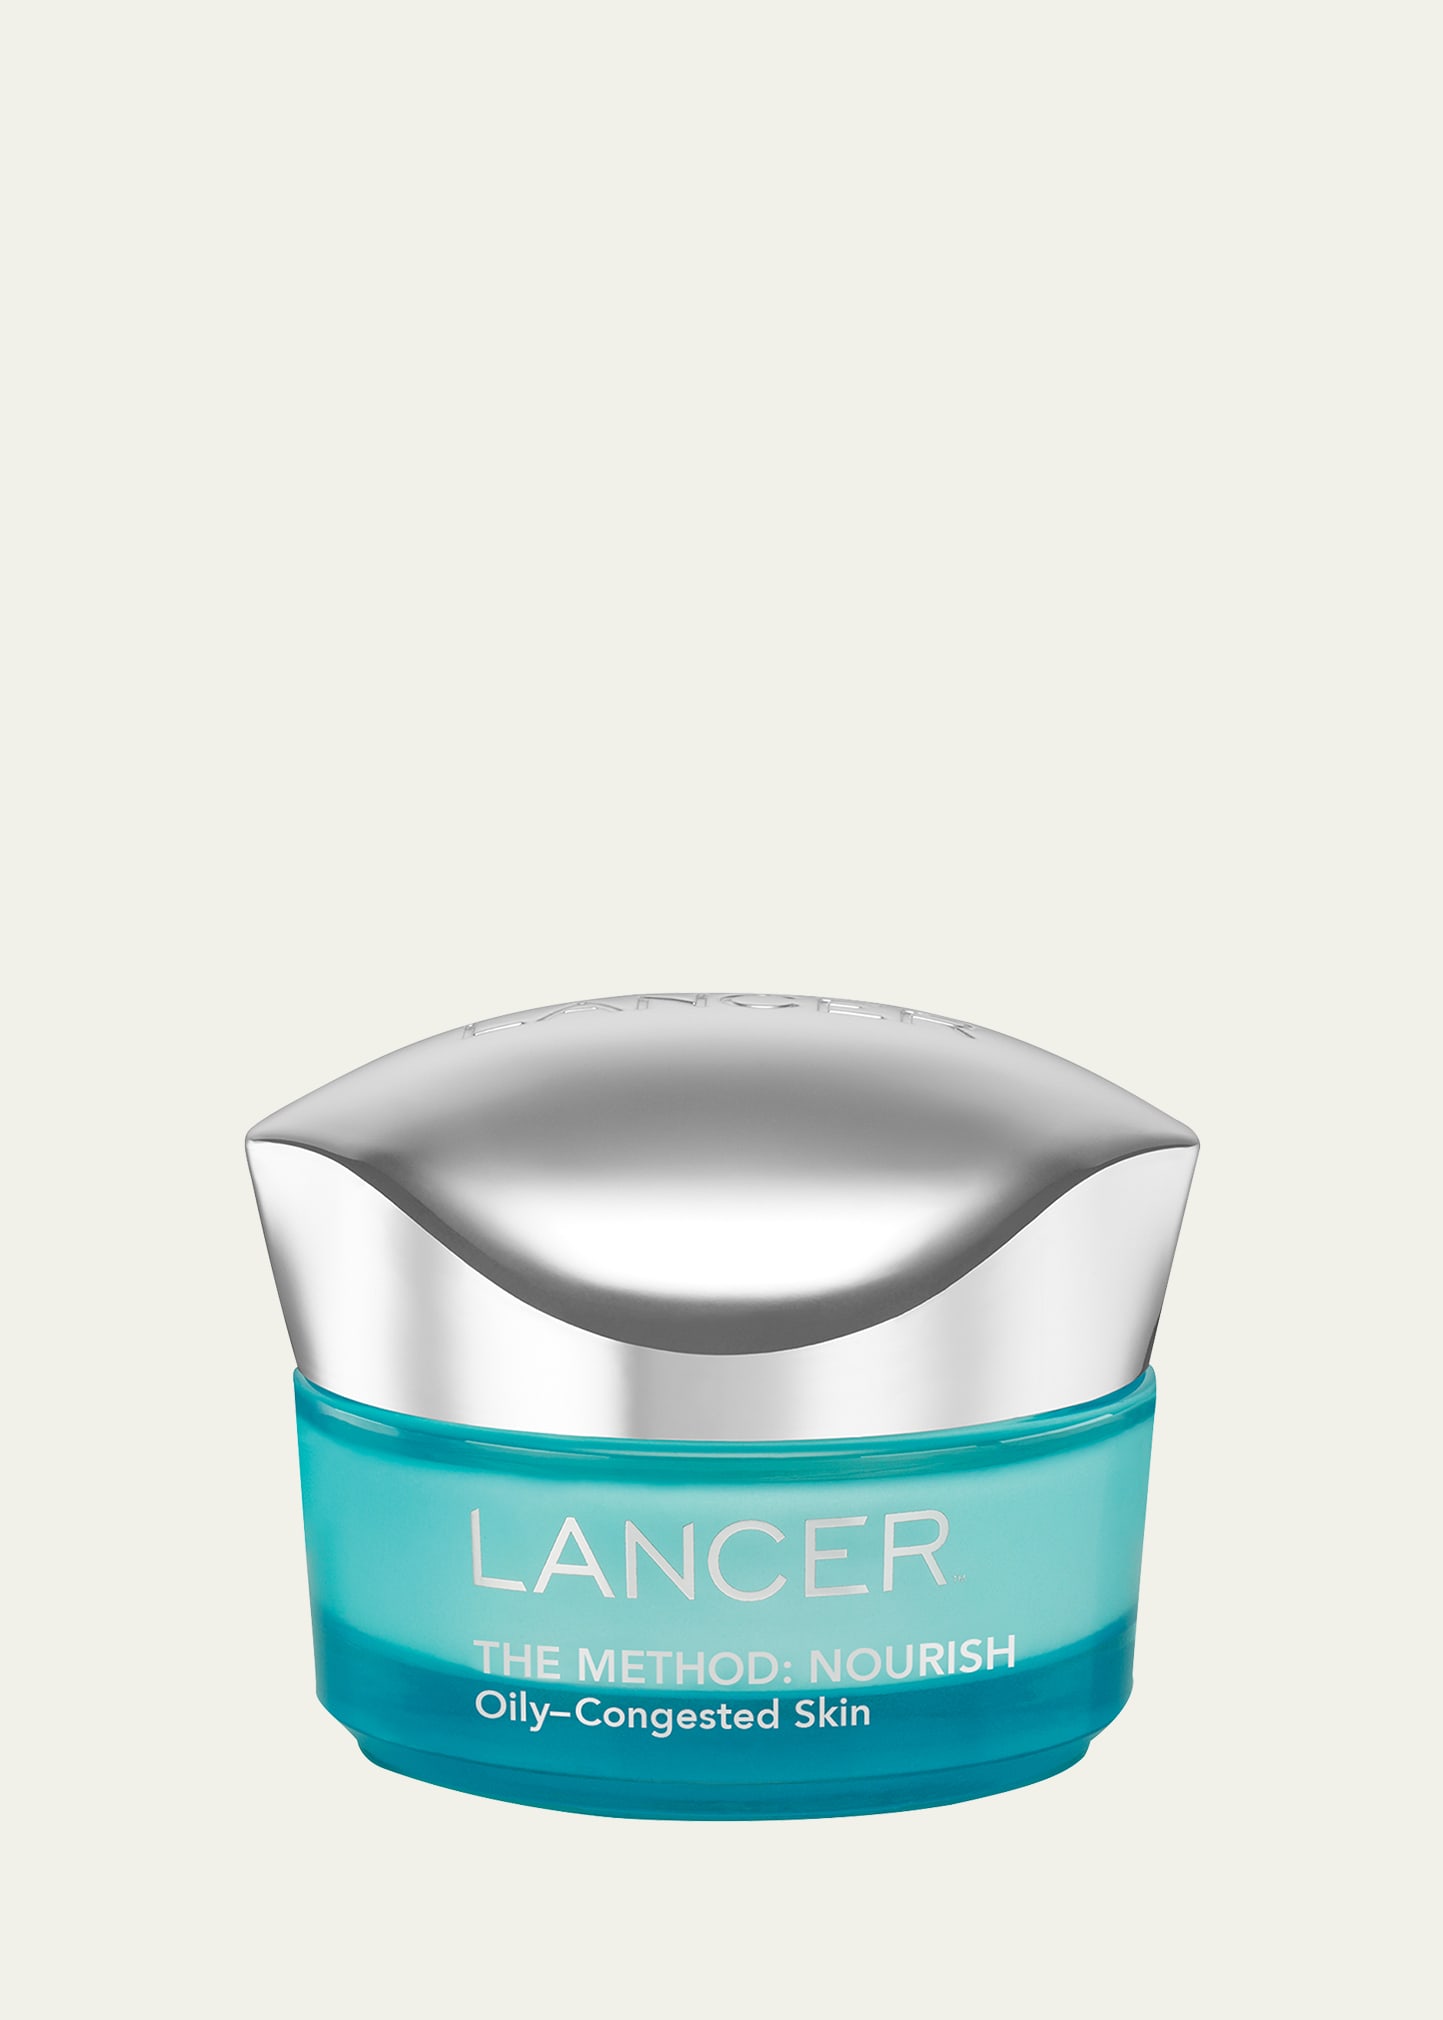 Lancer The Method: Nourish Oily-Congested (formerly Blemish Control), 1.7 oz.